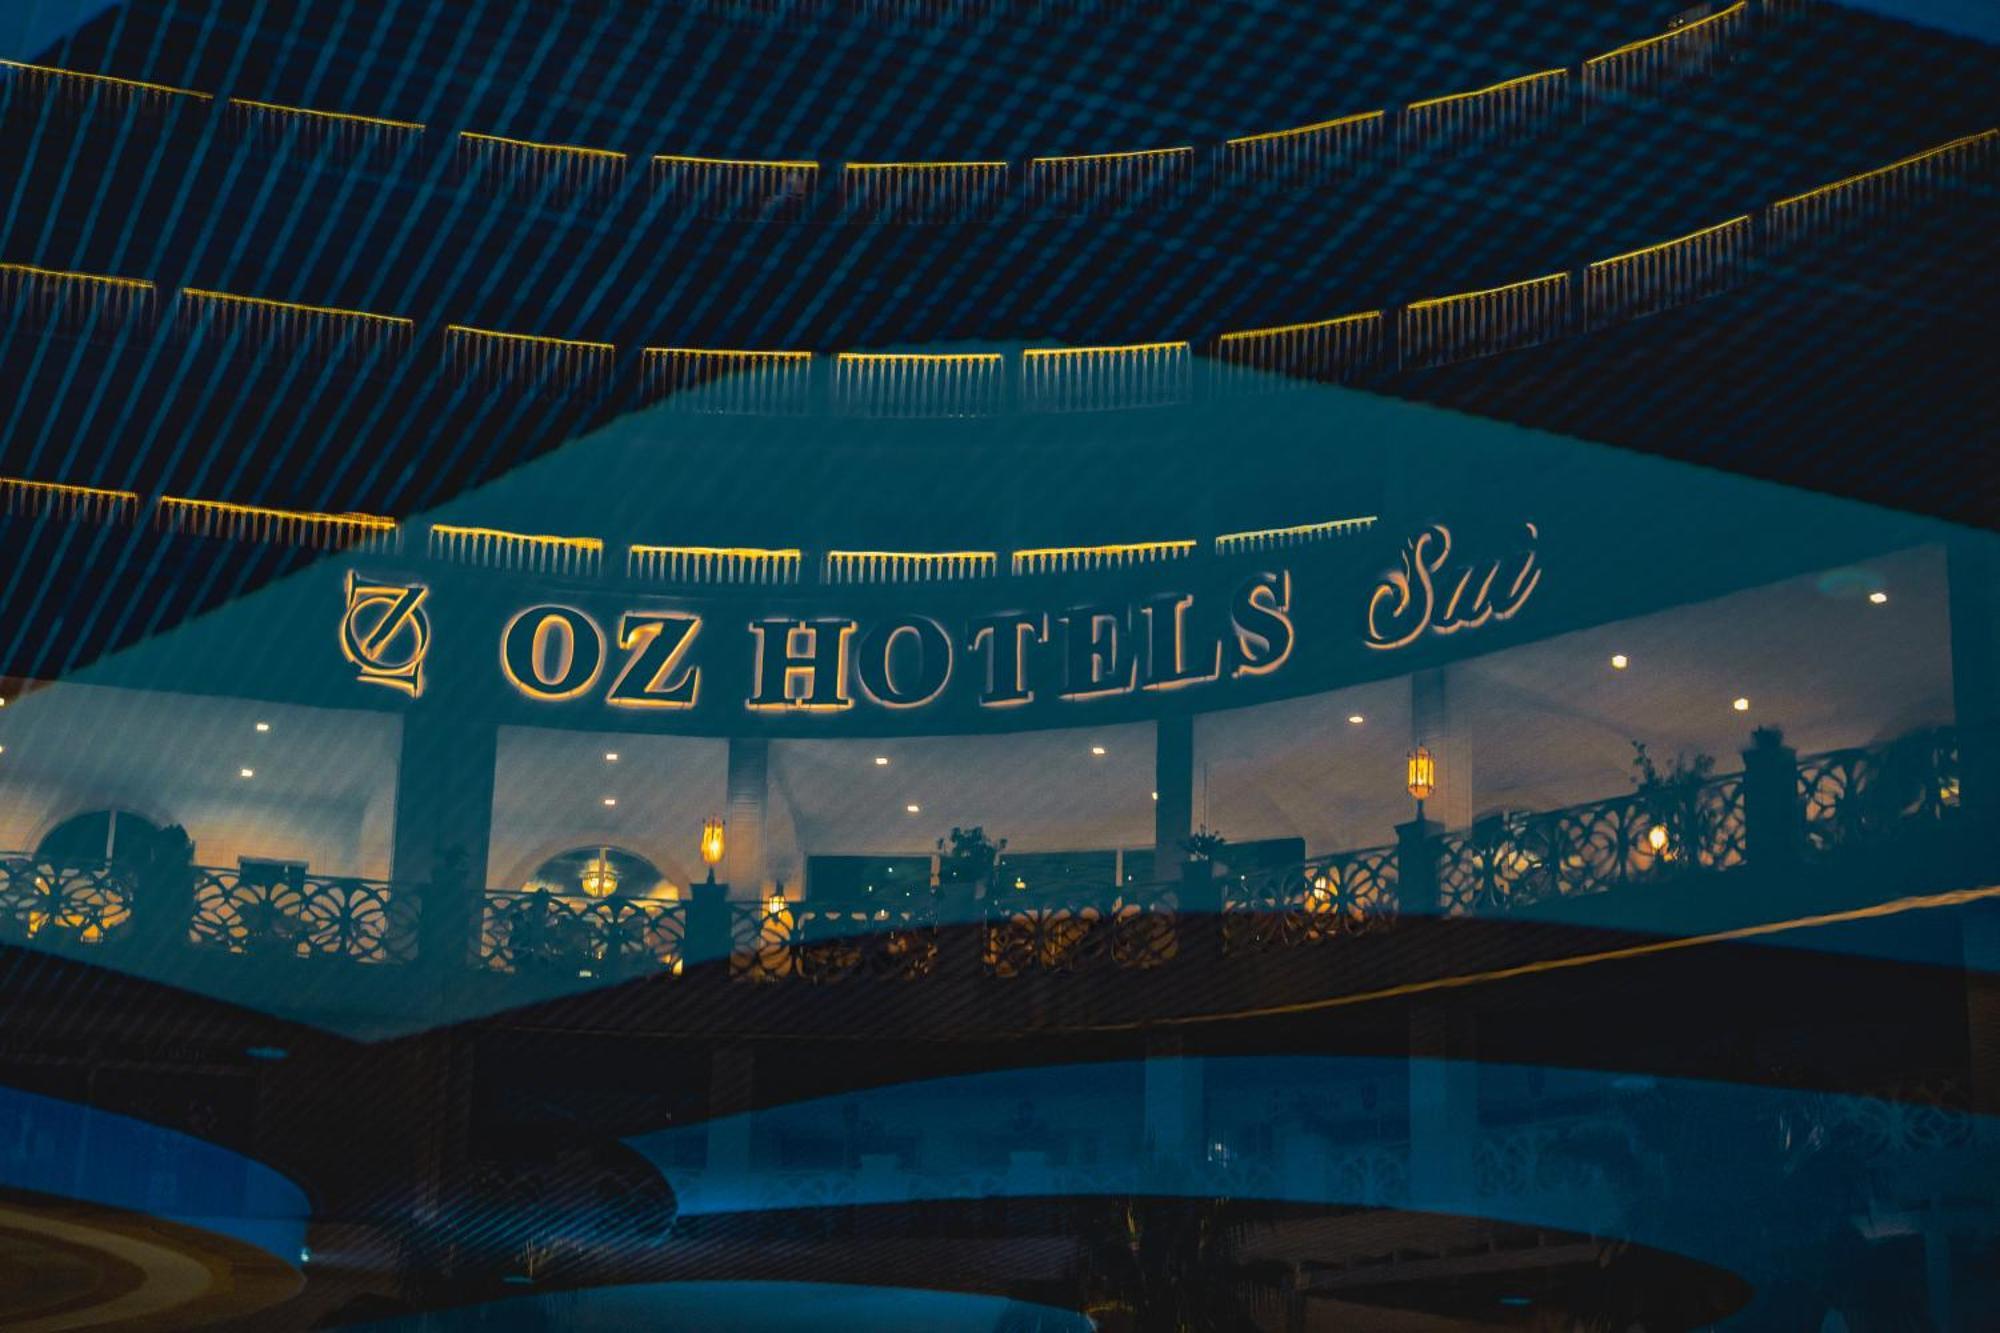 Oz Hotels Sui 알란야 외부 사진